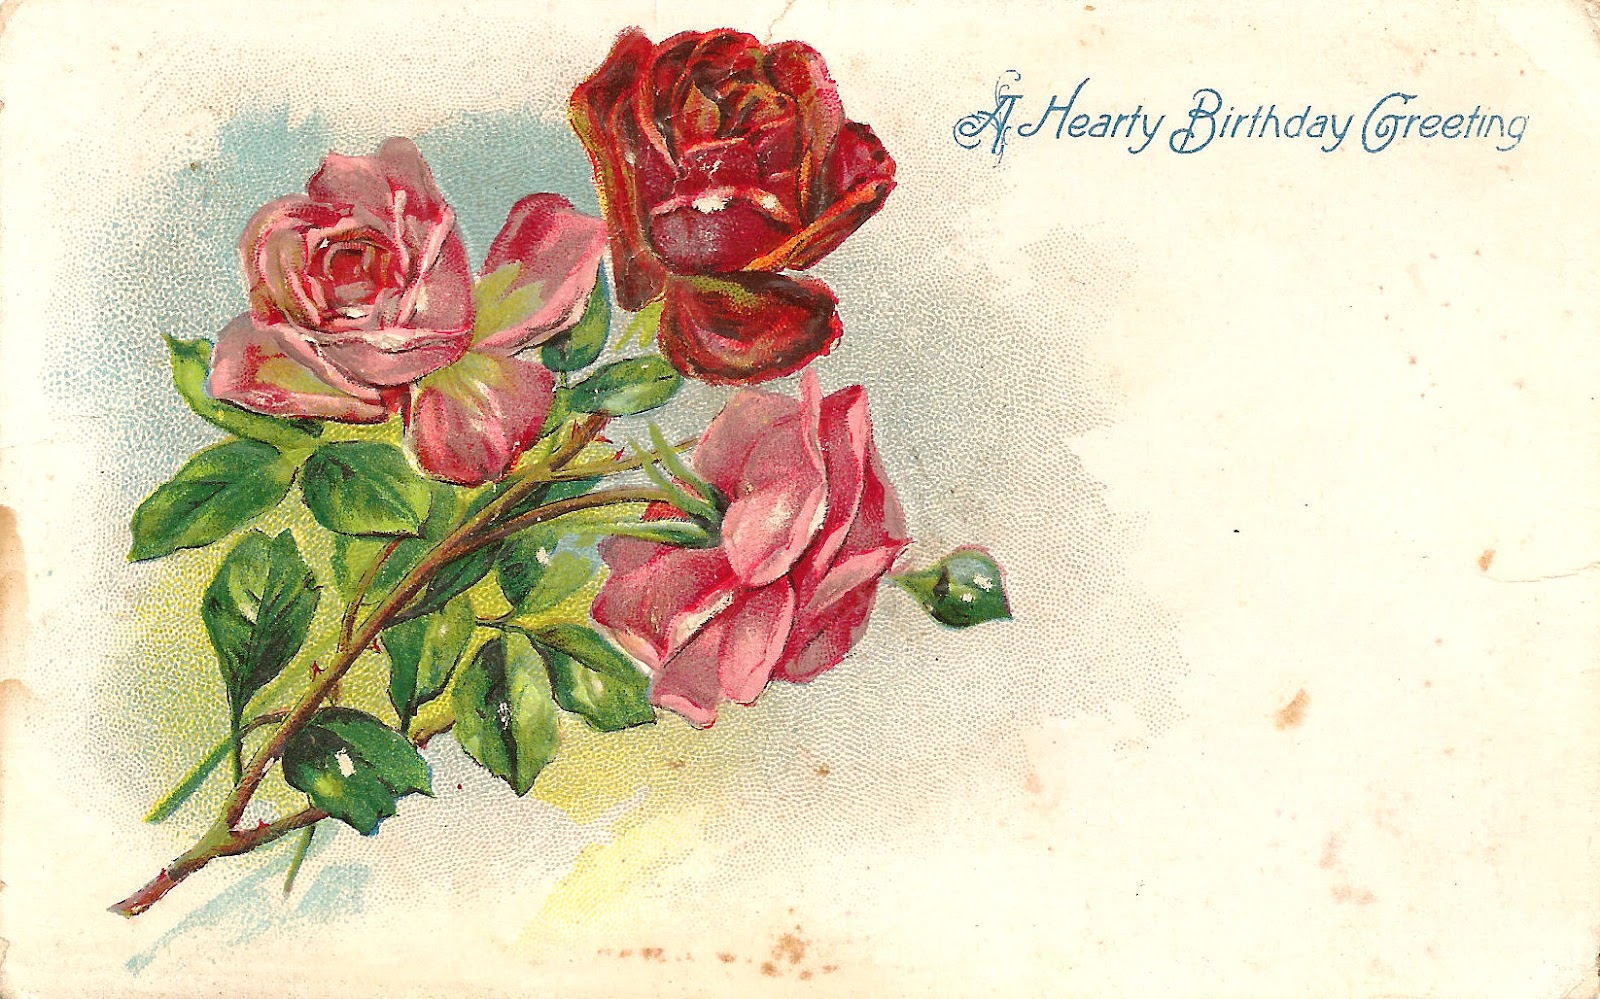 Free Flower Clip Art  3 Red And Pink Rose Graphics On Vintage Birthday